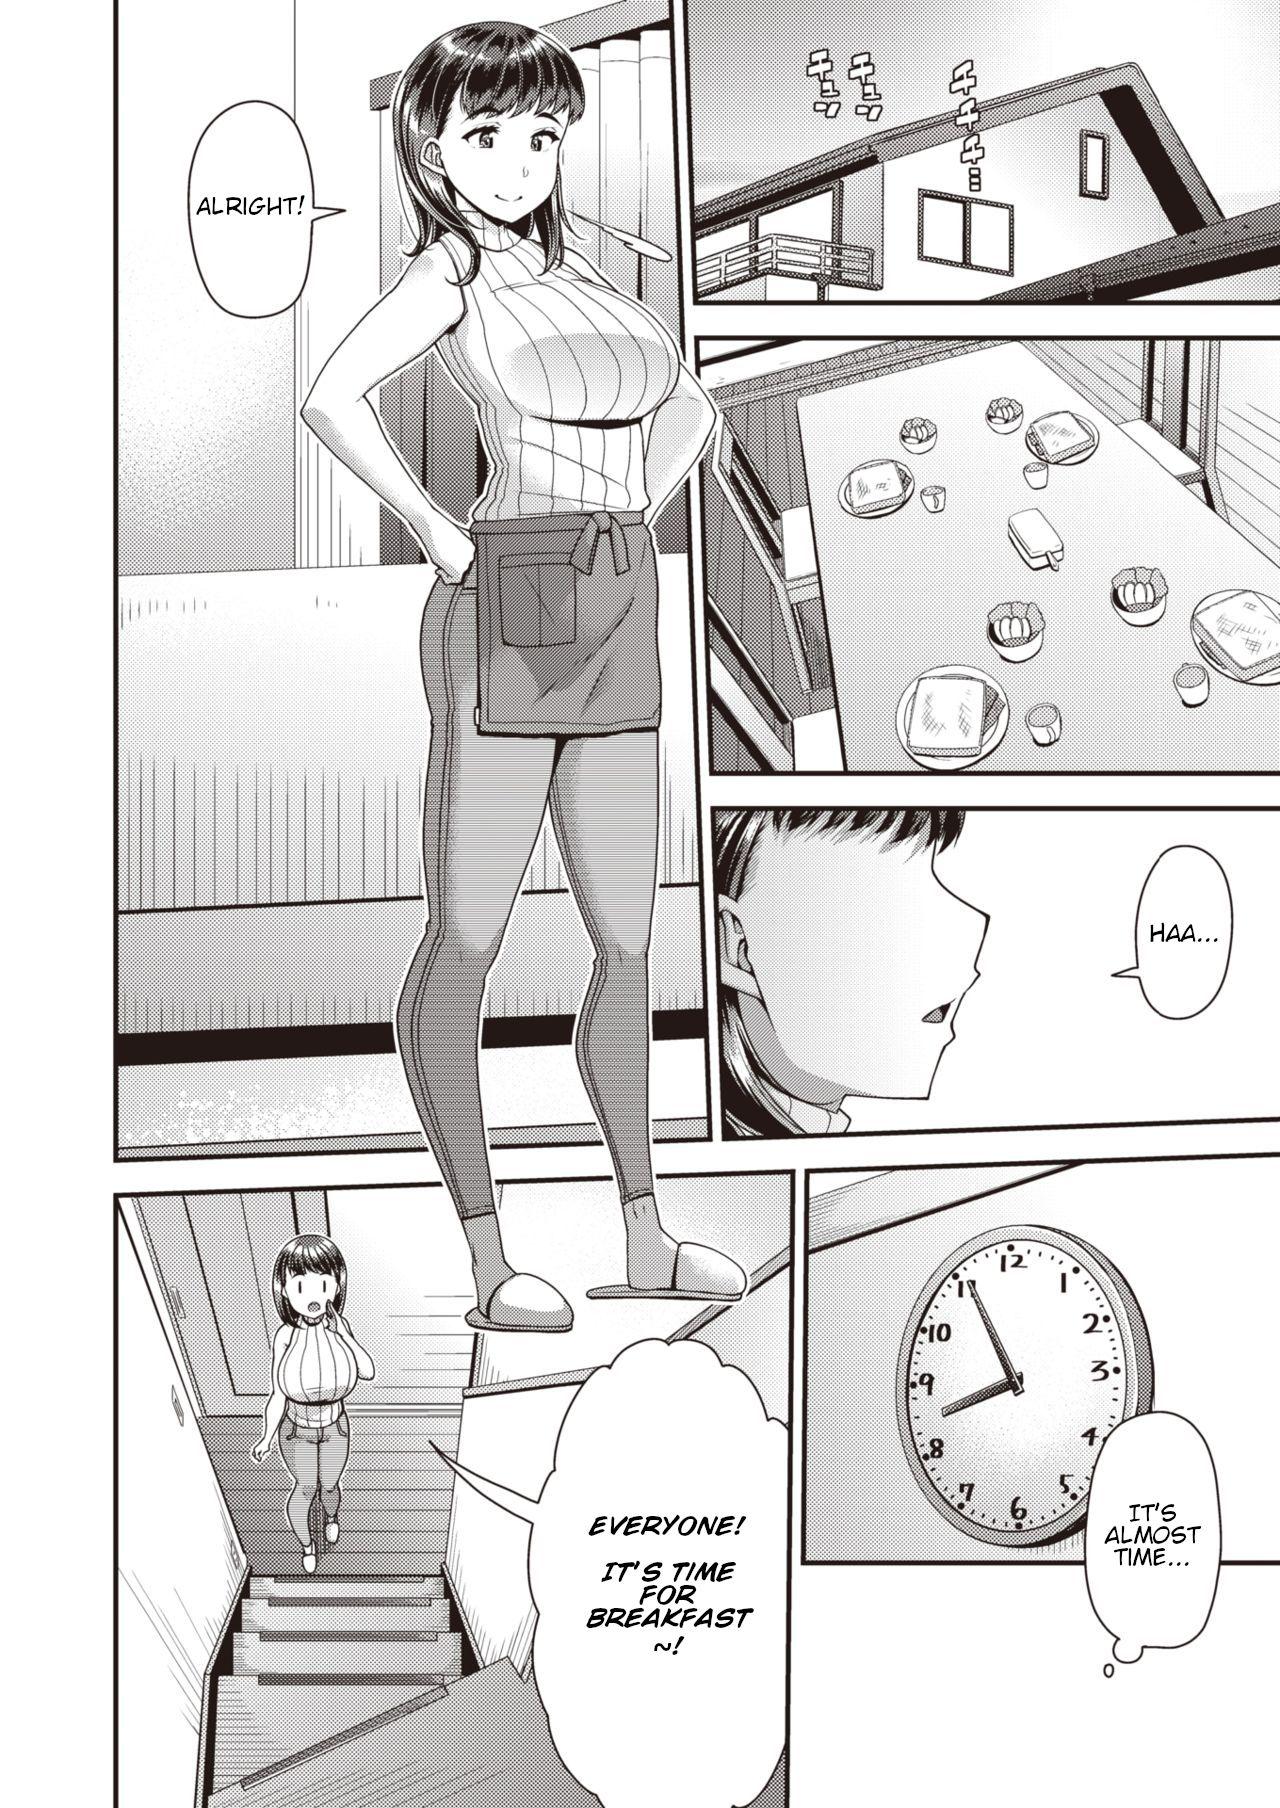 Family X Page 2 Of 17 hentai haven, Family X Page 2 Of 17 uncensored hentai